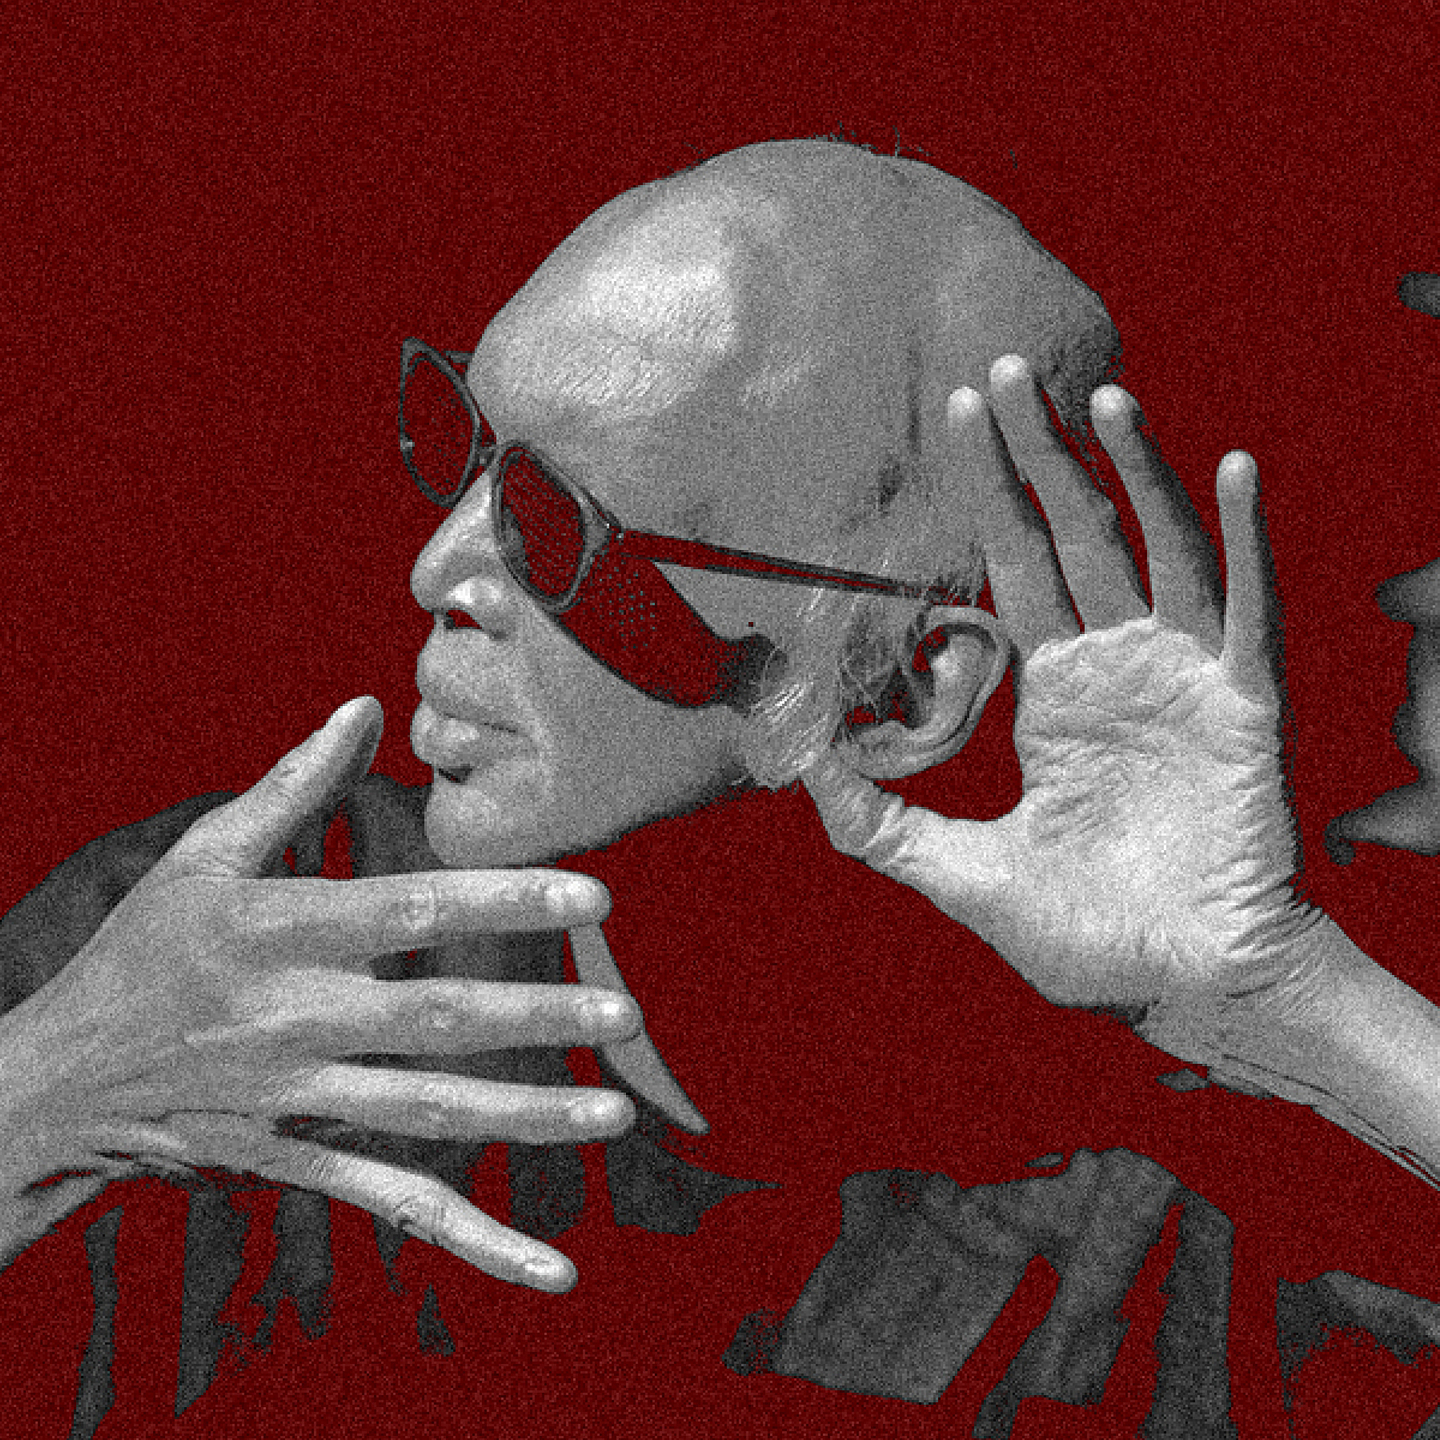 A solarized black and white photo of Shahzad Ismaily wearing sunglasses, while looking over his right shoulder and raising his left had to his ear.